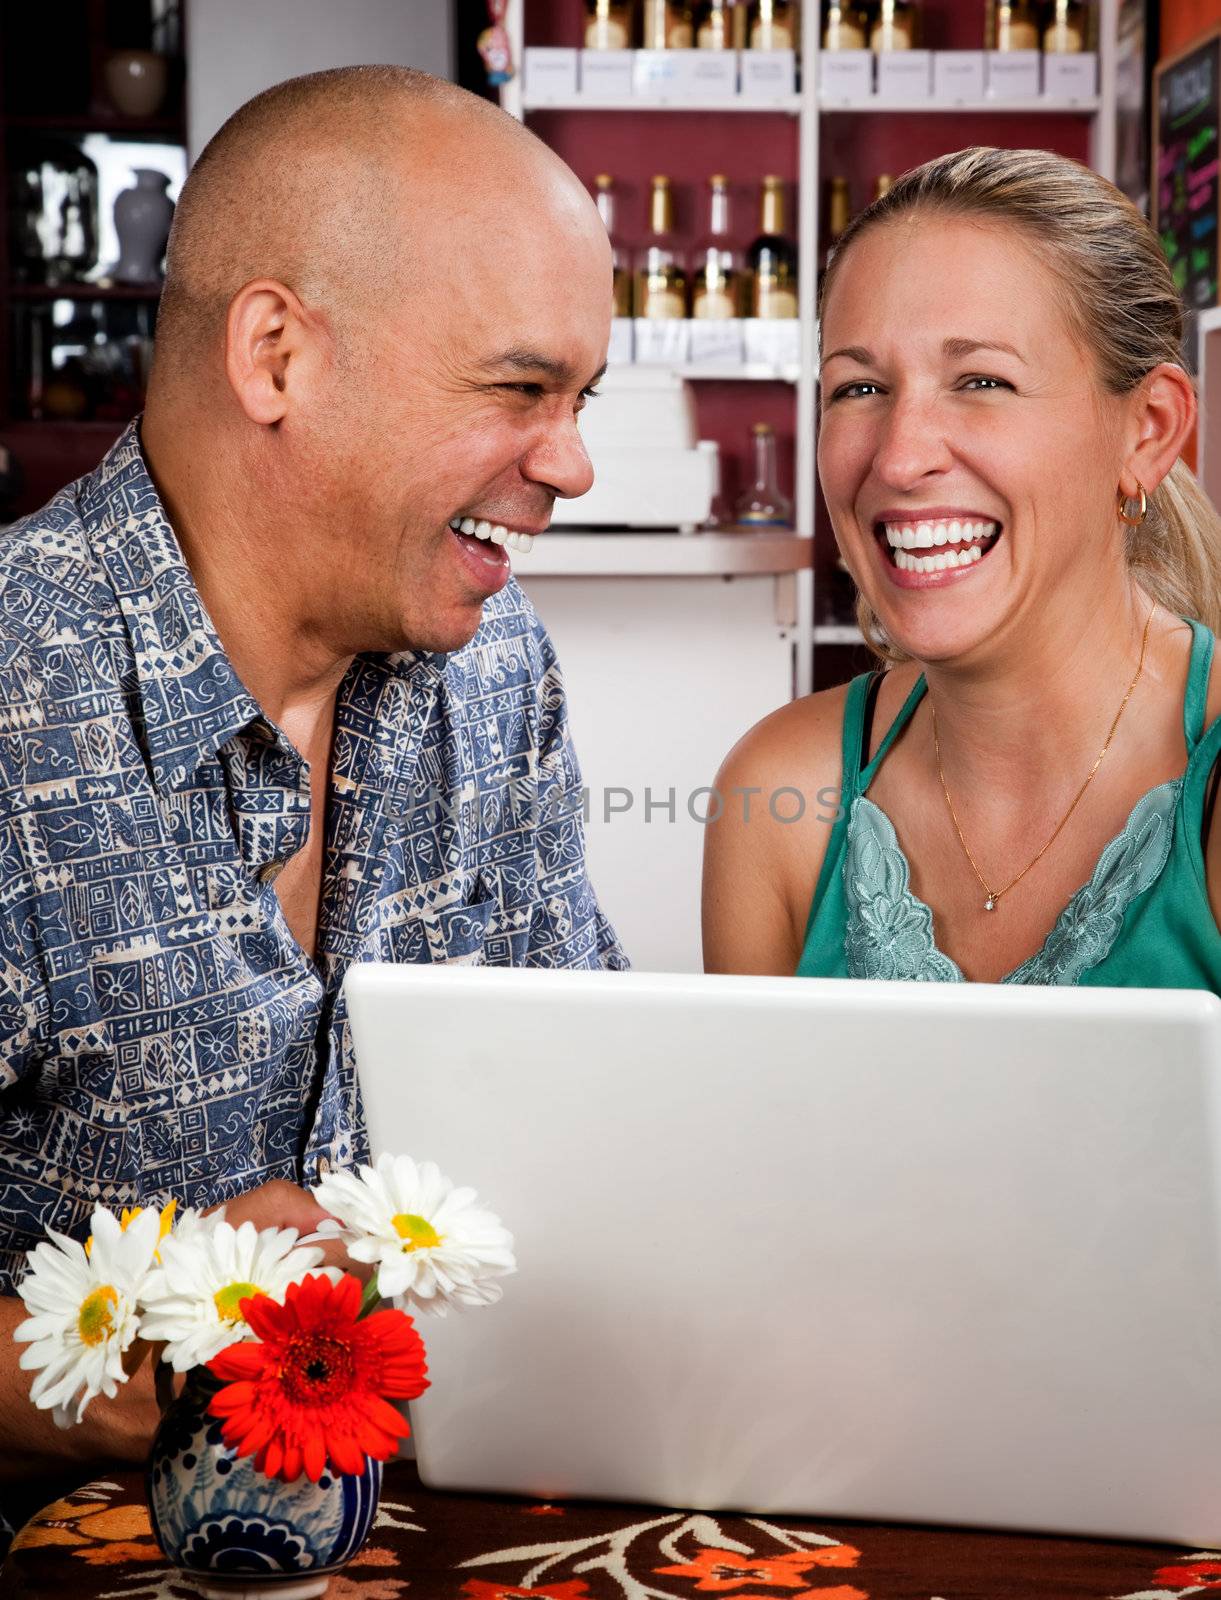 Attractive couple in a coffee house with laptop computer